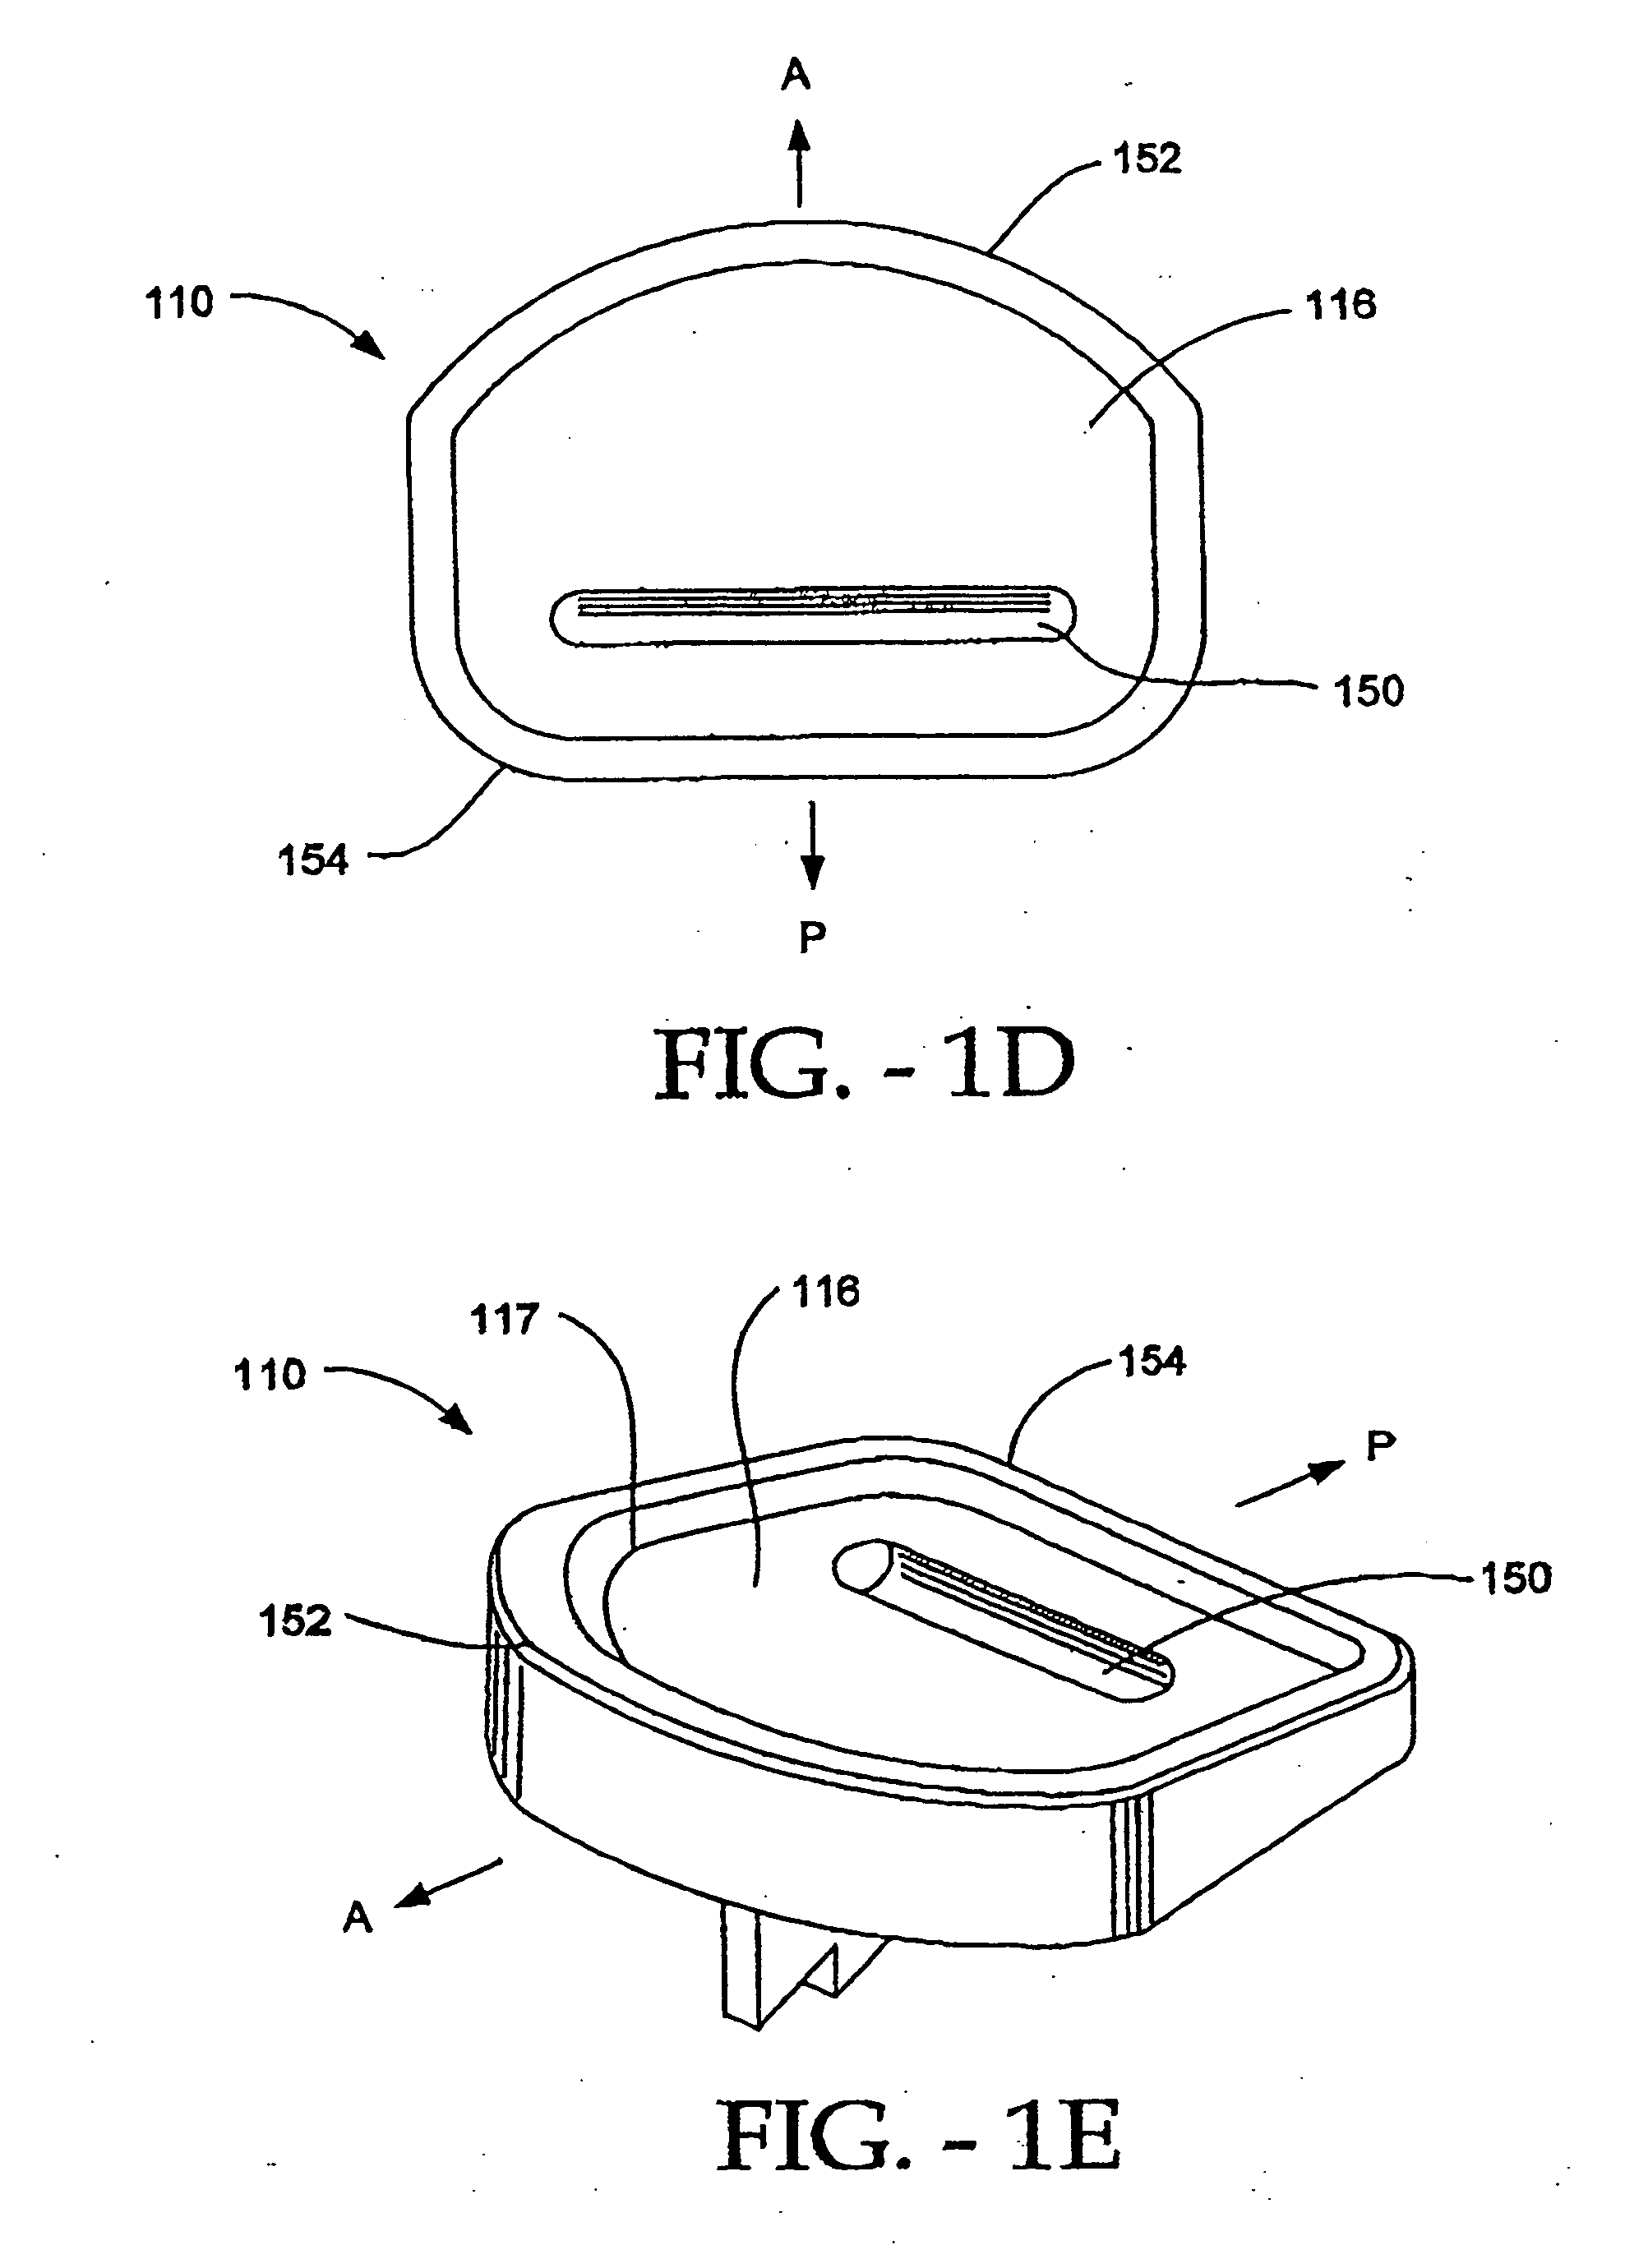 Artificial vertebral disk replacement implant with crossbar spacer and method